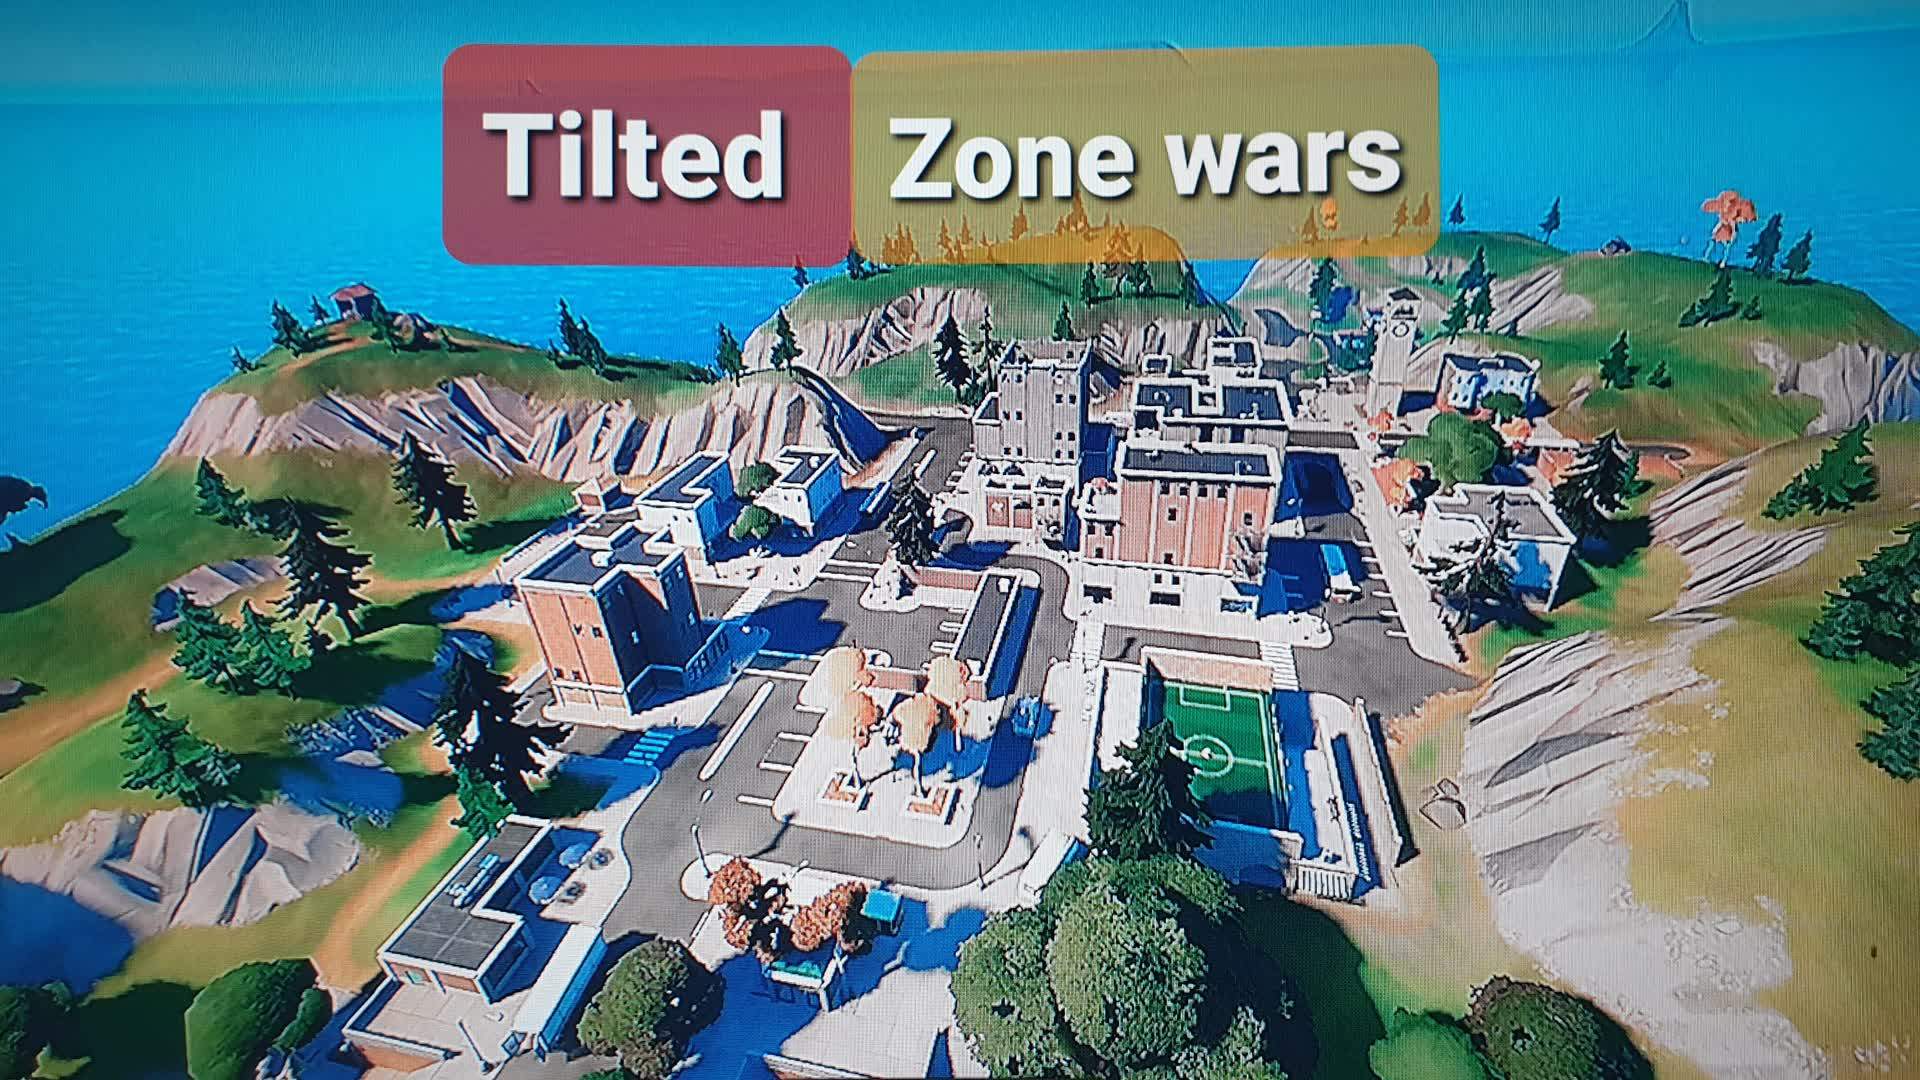 Tilted Towers - Zonewars